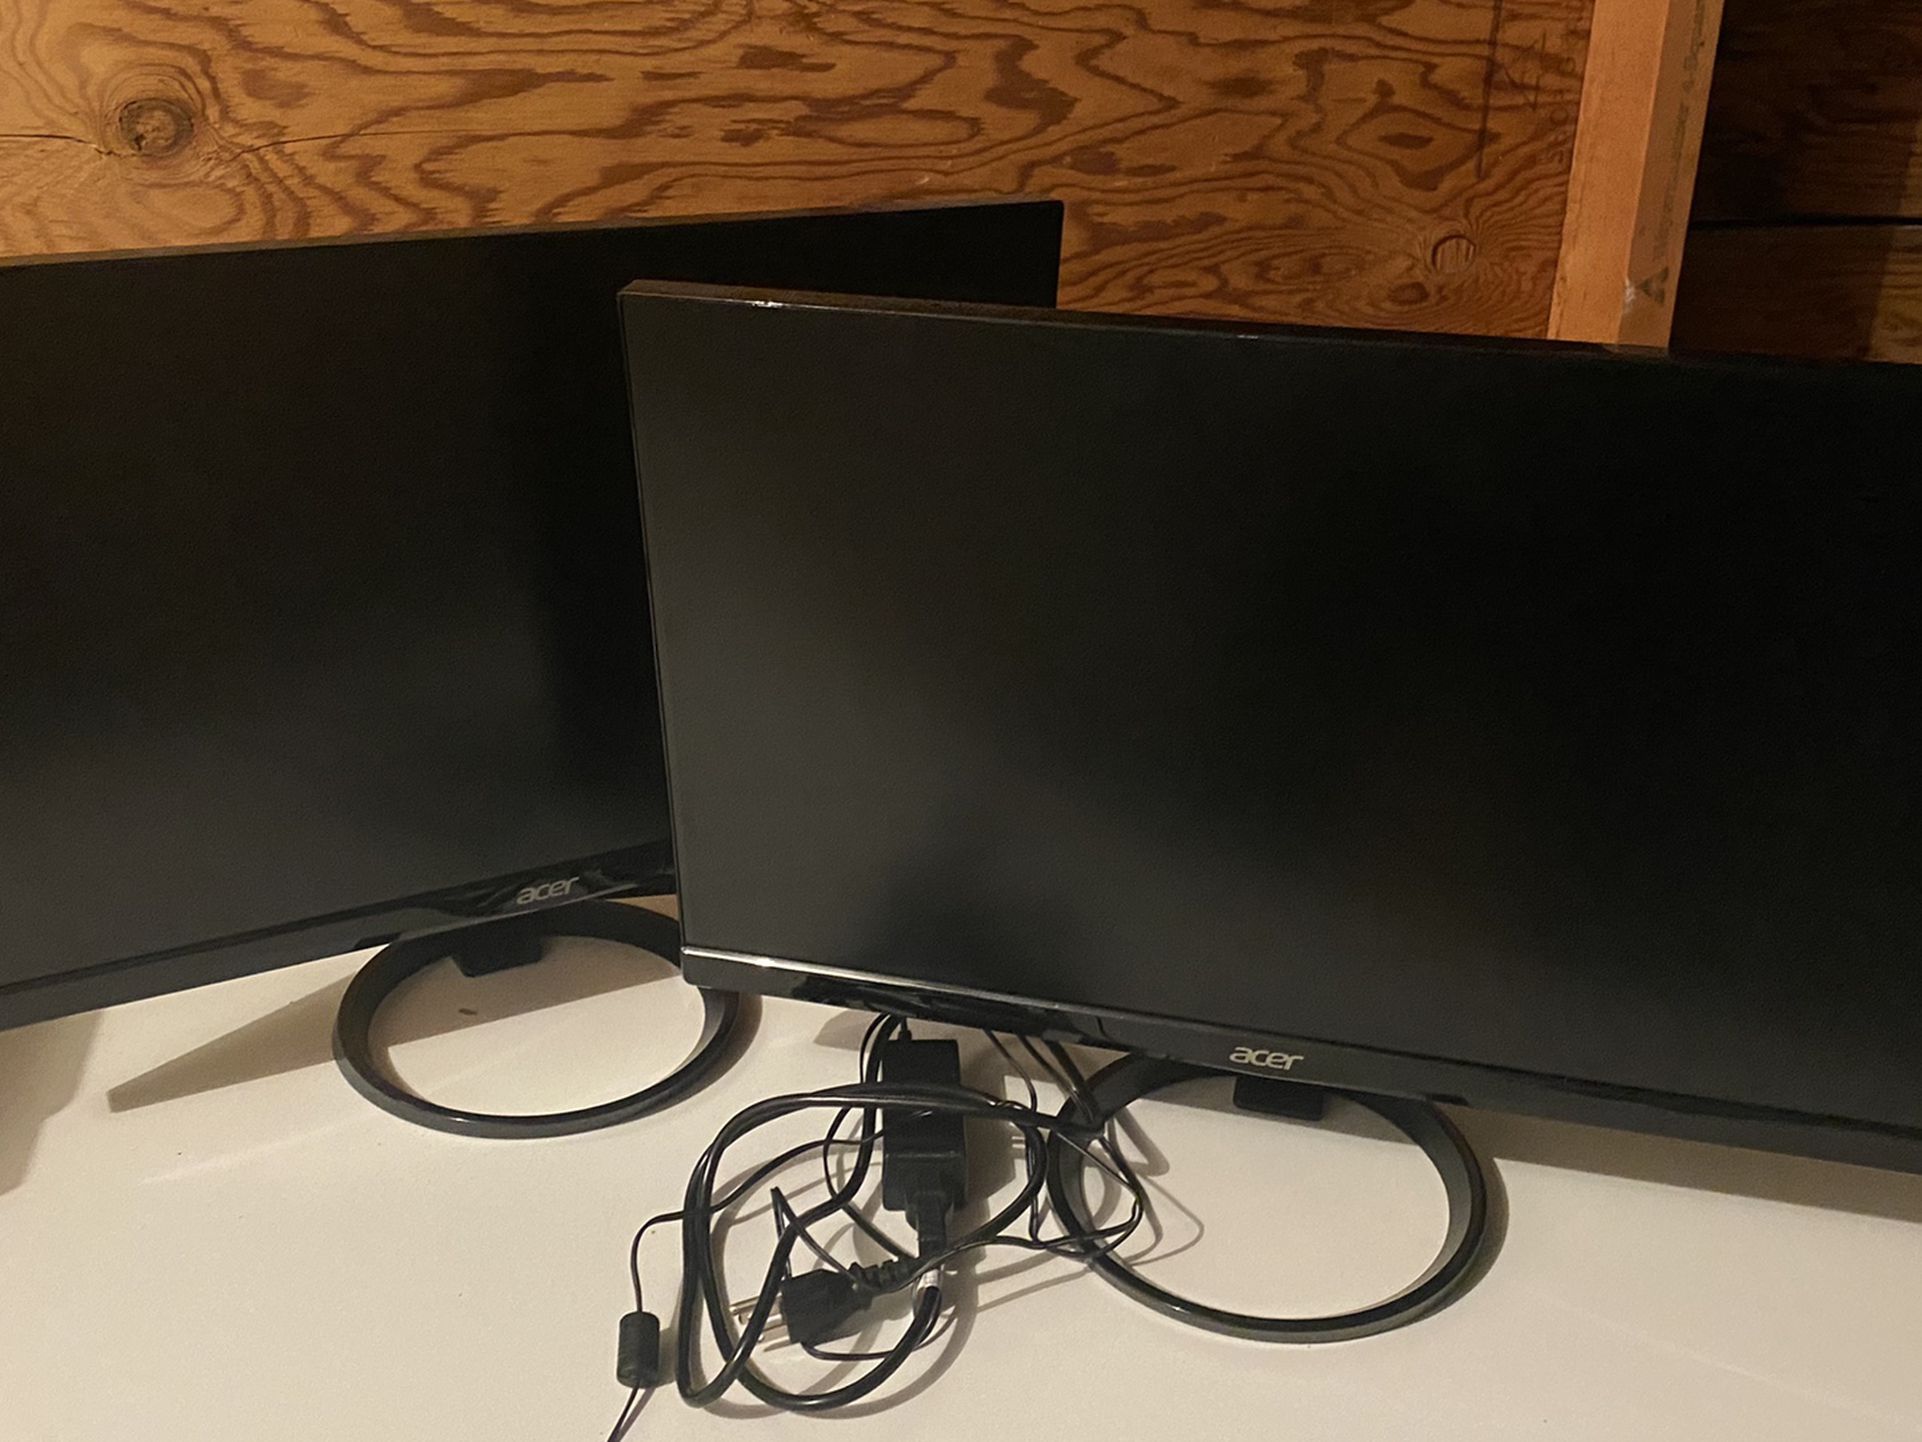 Two Acer Monitors